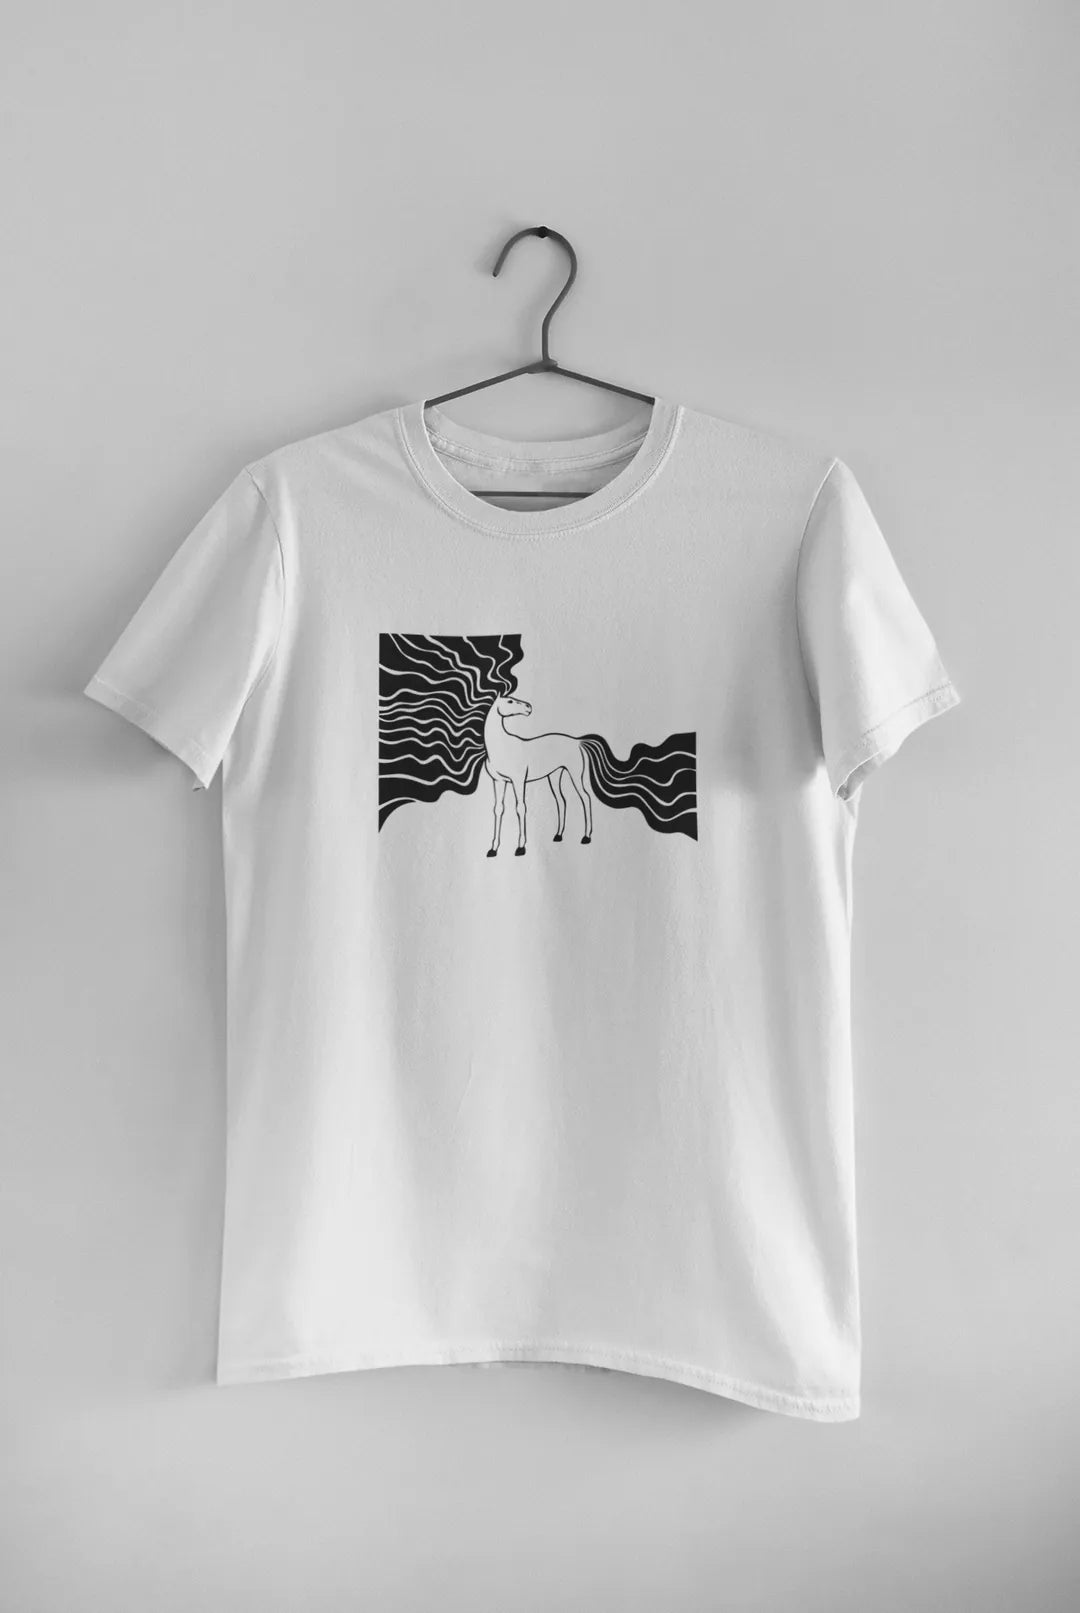 Long Tailed and Maned Horse T-Shirt